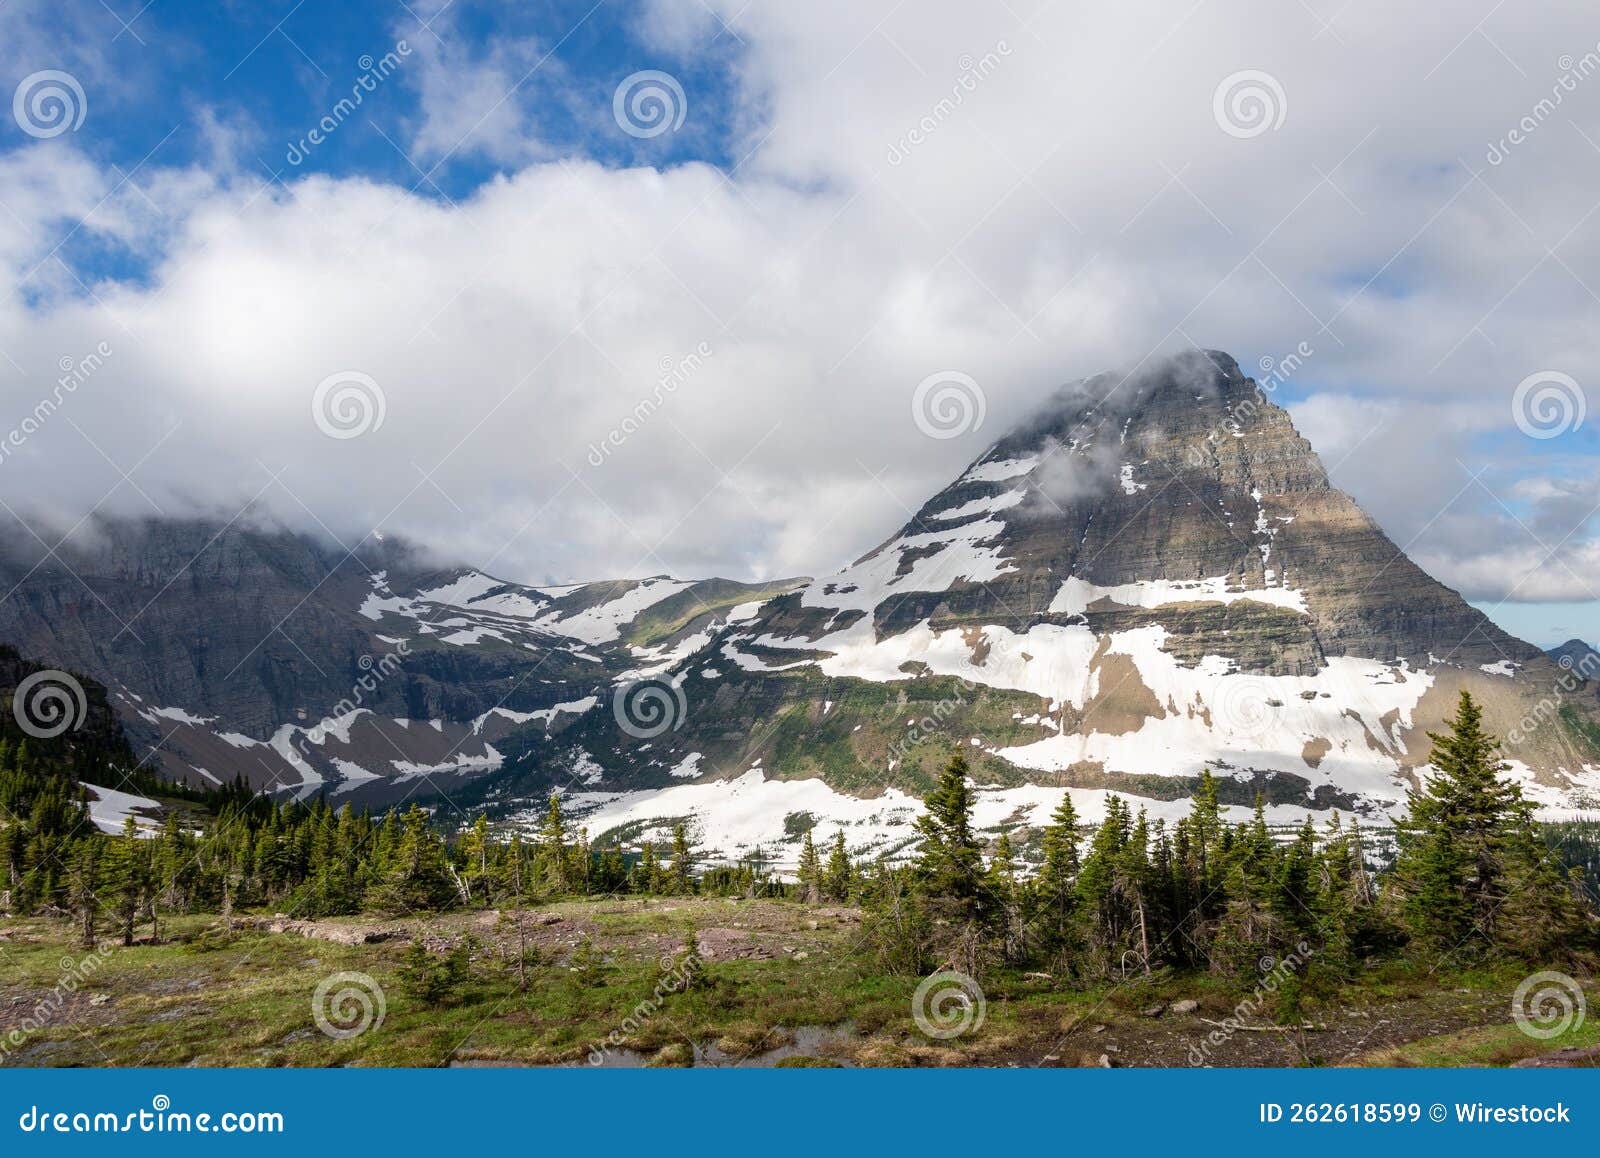 horizontal image of sinopah mountain half covered with snow and trees in glacier national park